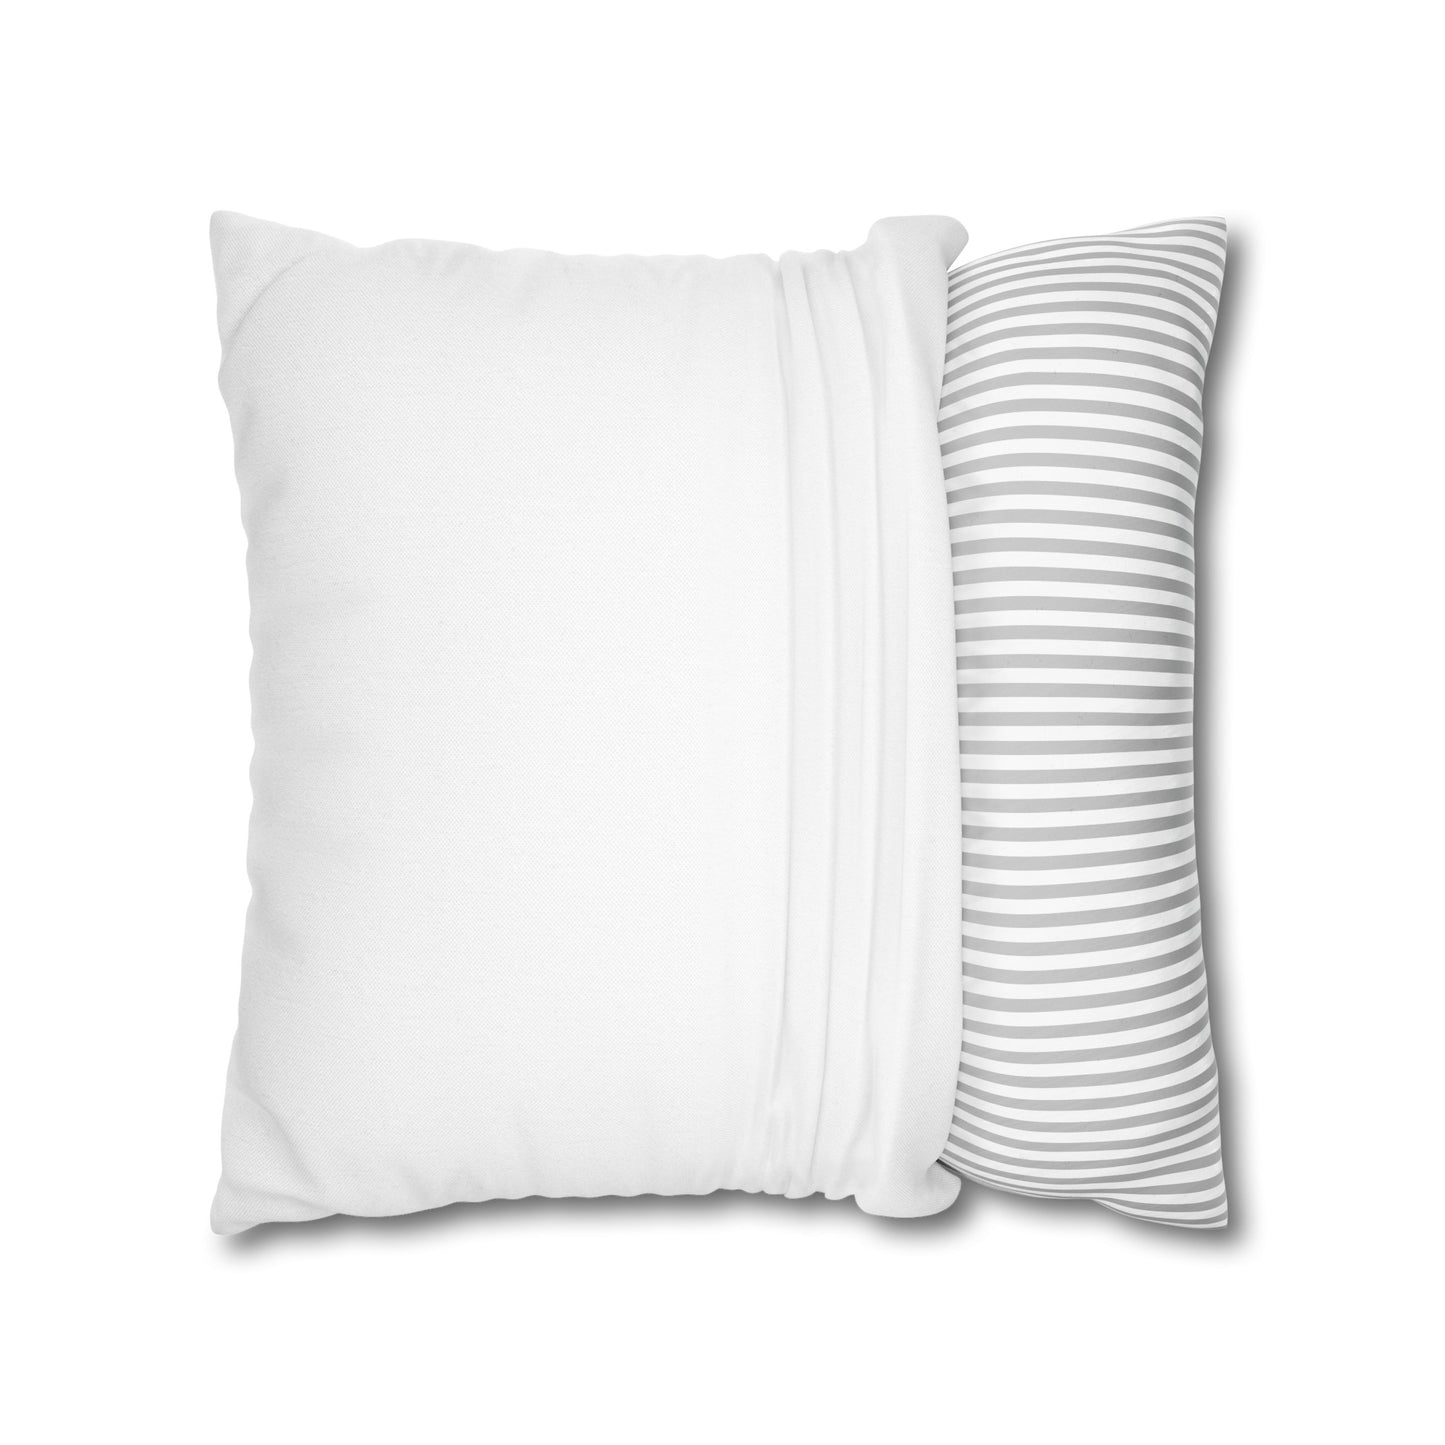 "Just The Tip" Bubble Tip Anemone Square Pillow Cover